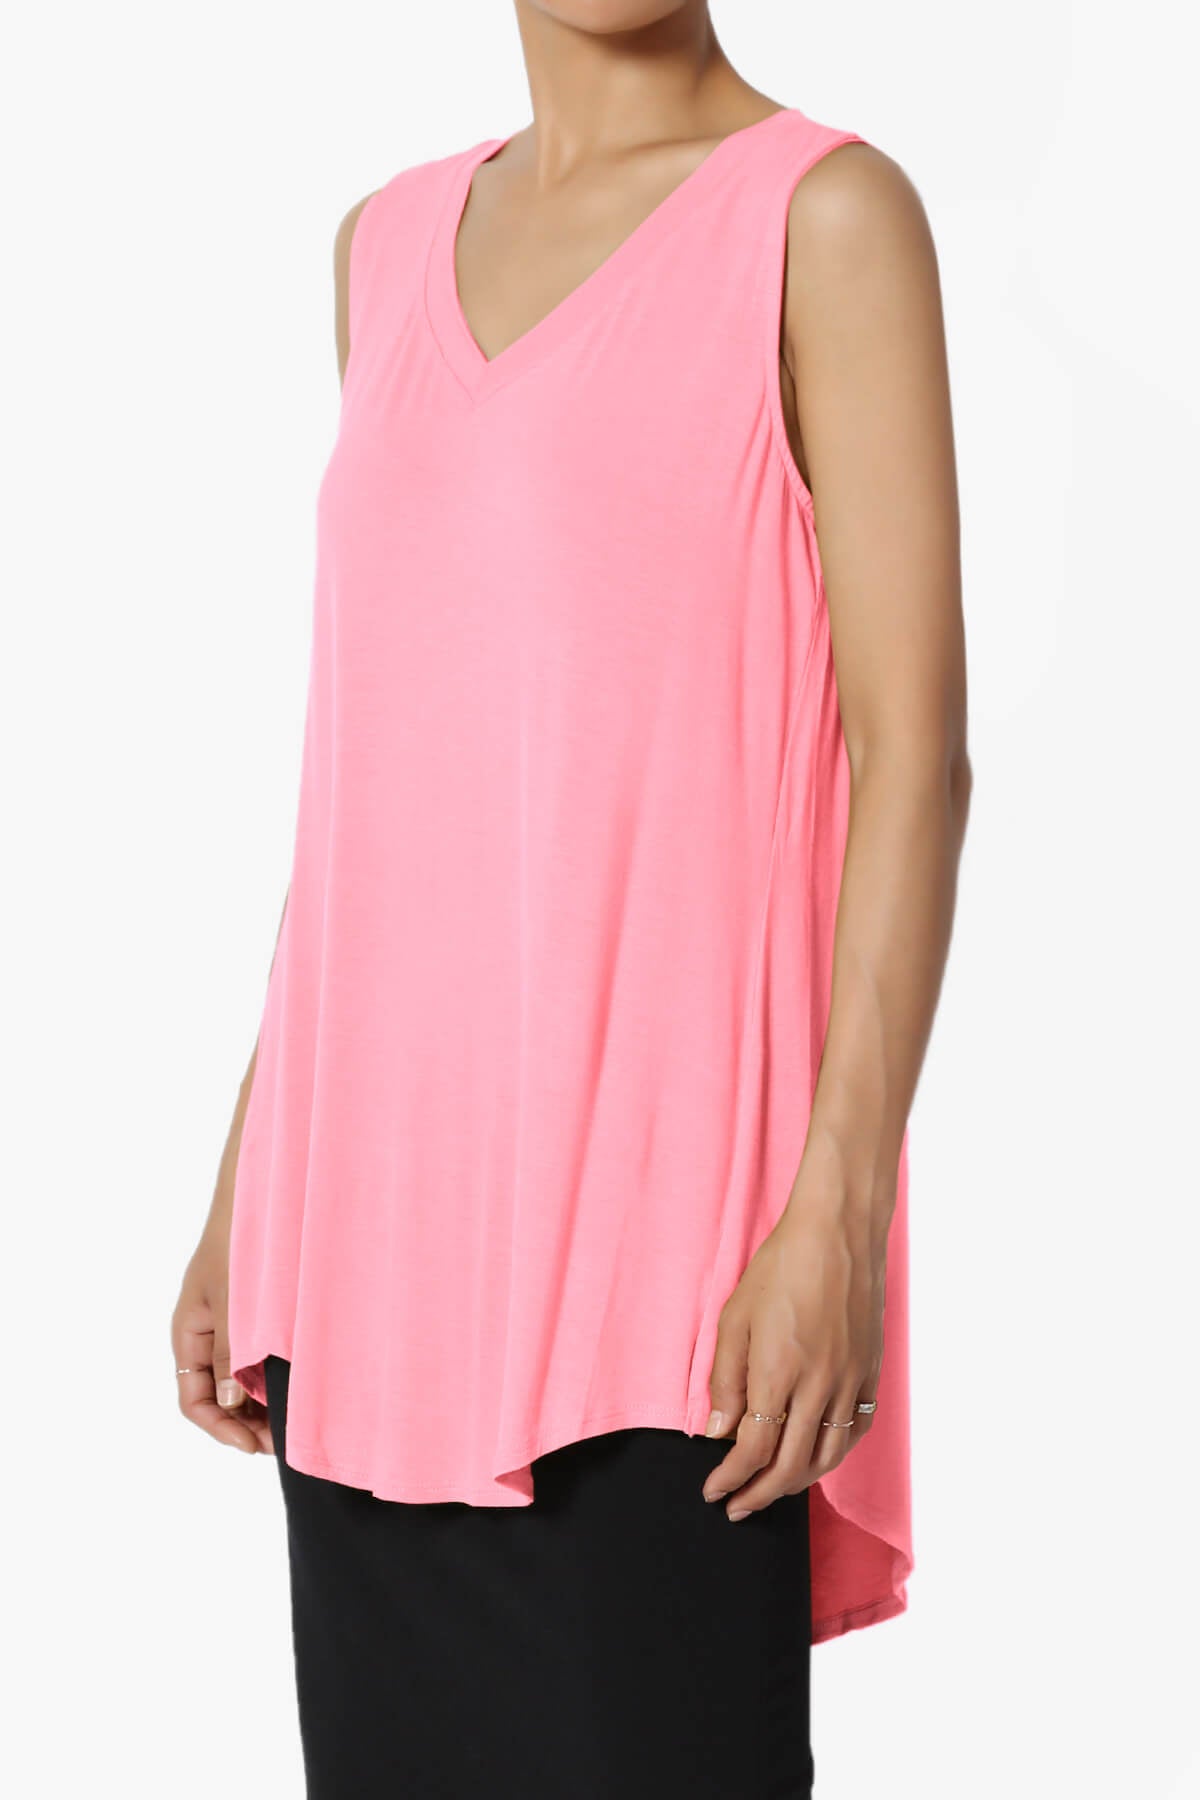 Myles Sleeveless V-Neck Luxe Jersey Top BRIGHT PINK_3